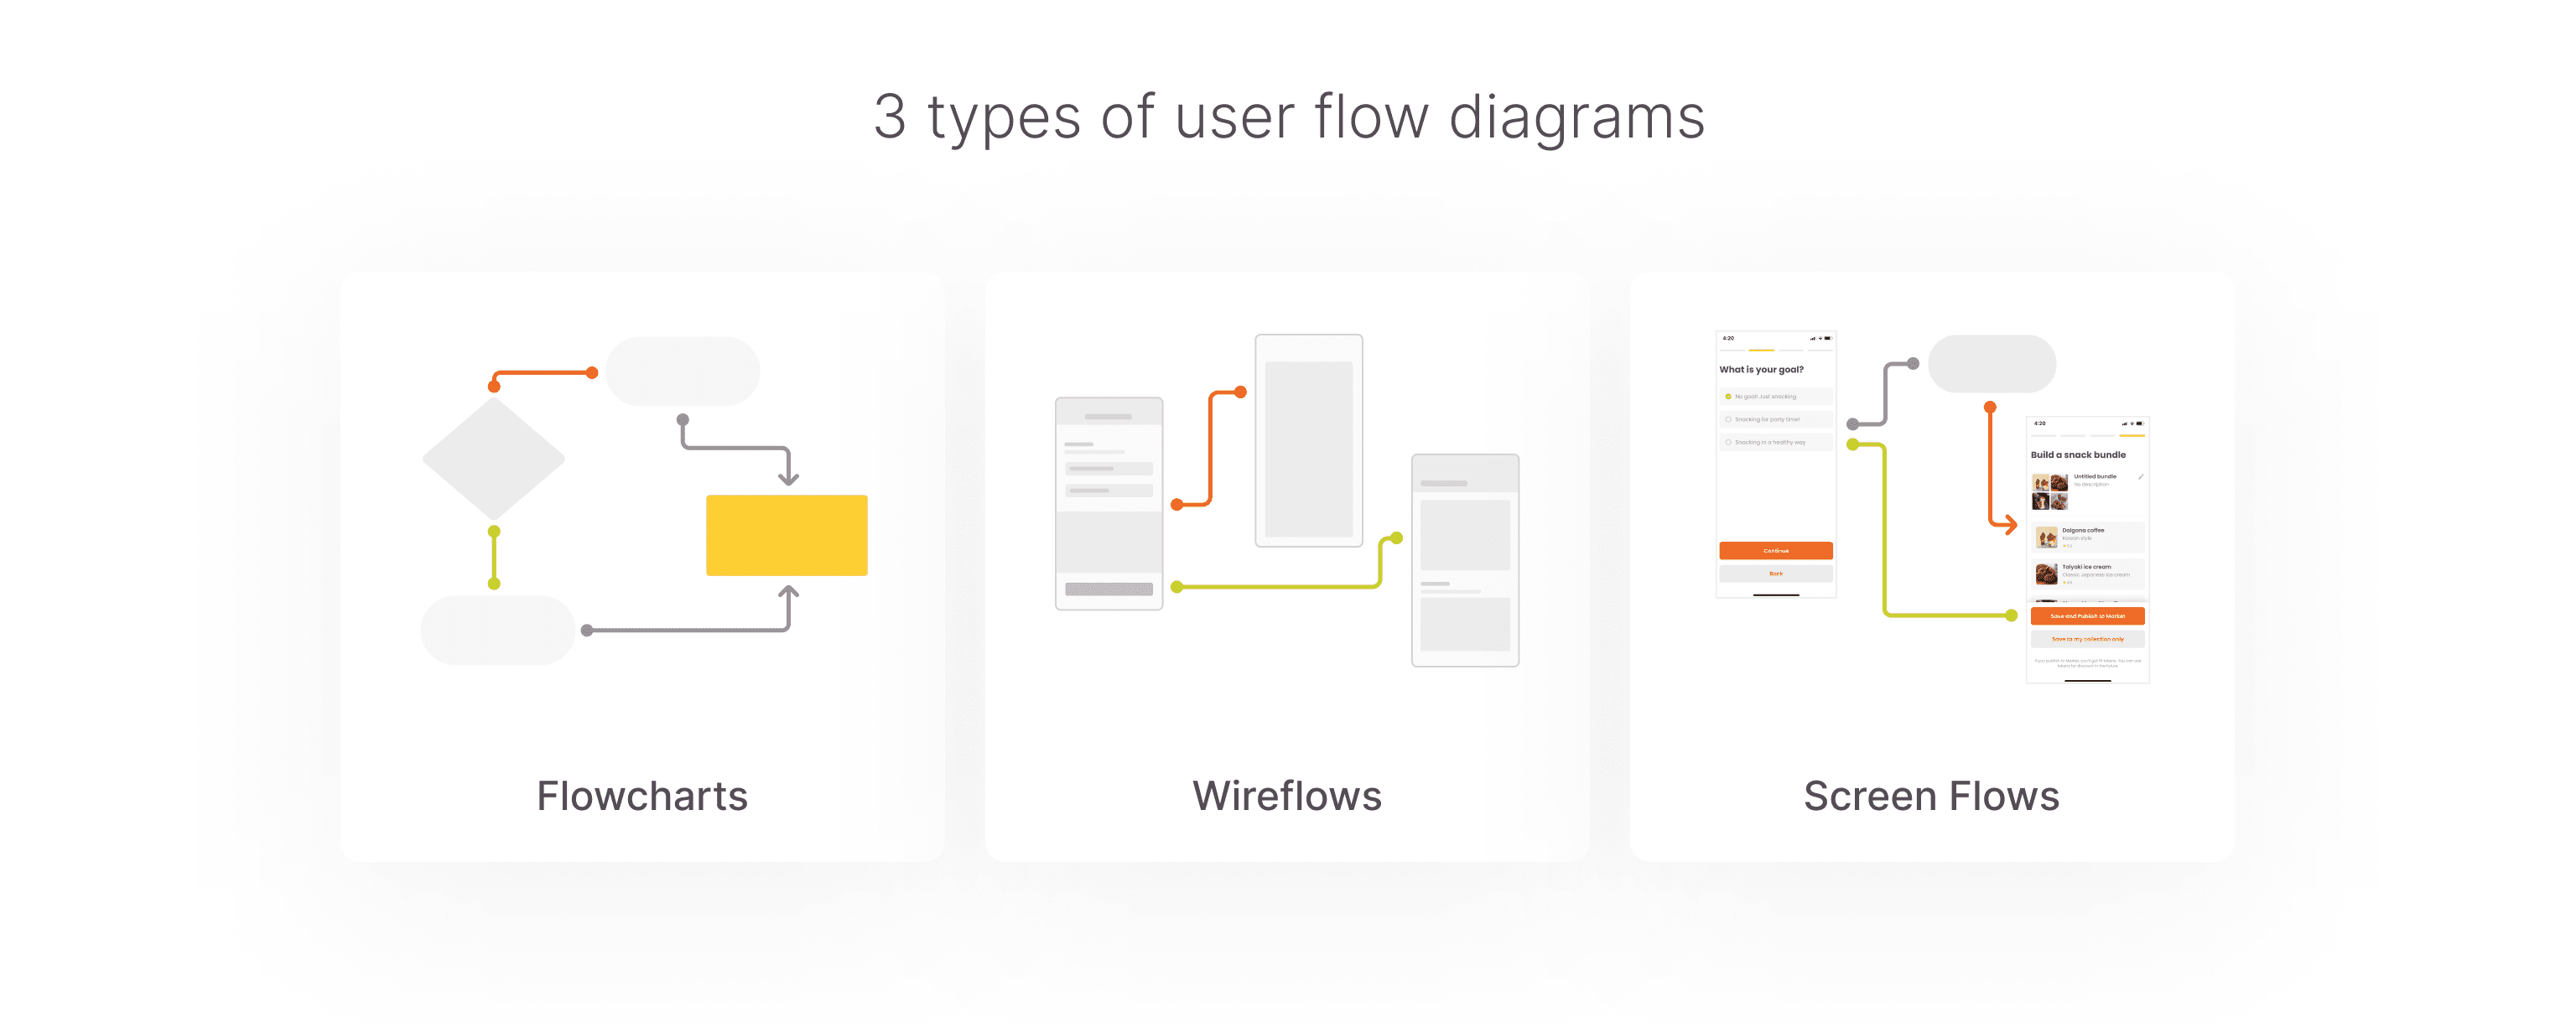 A graphic representation of flowcharts, wireflows, and screen flows